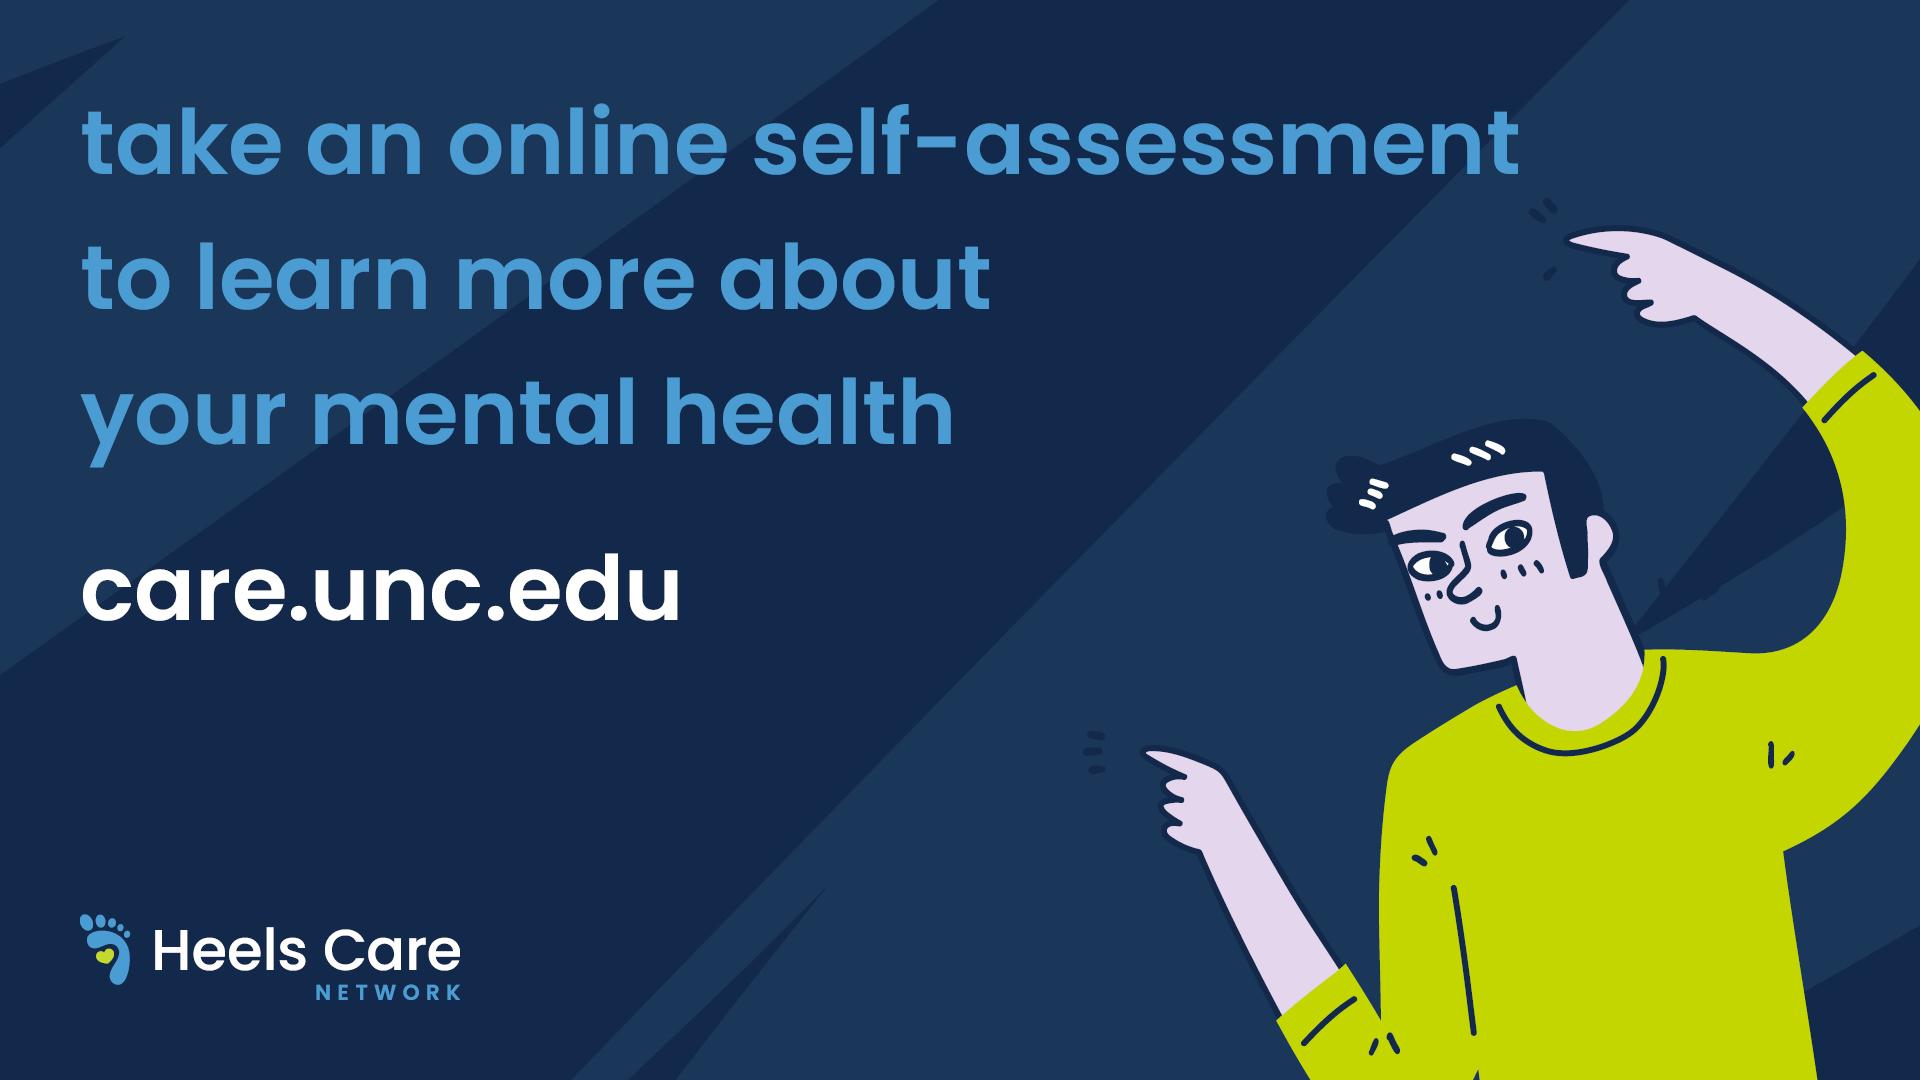 take an online self-assessment to learn more about your mental health